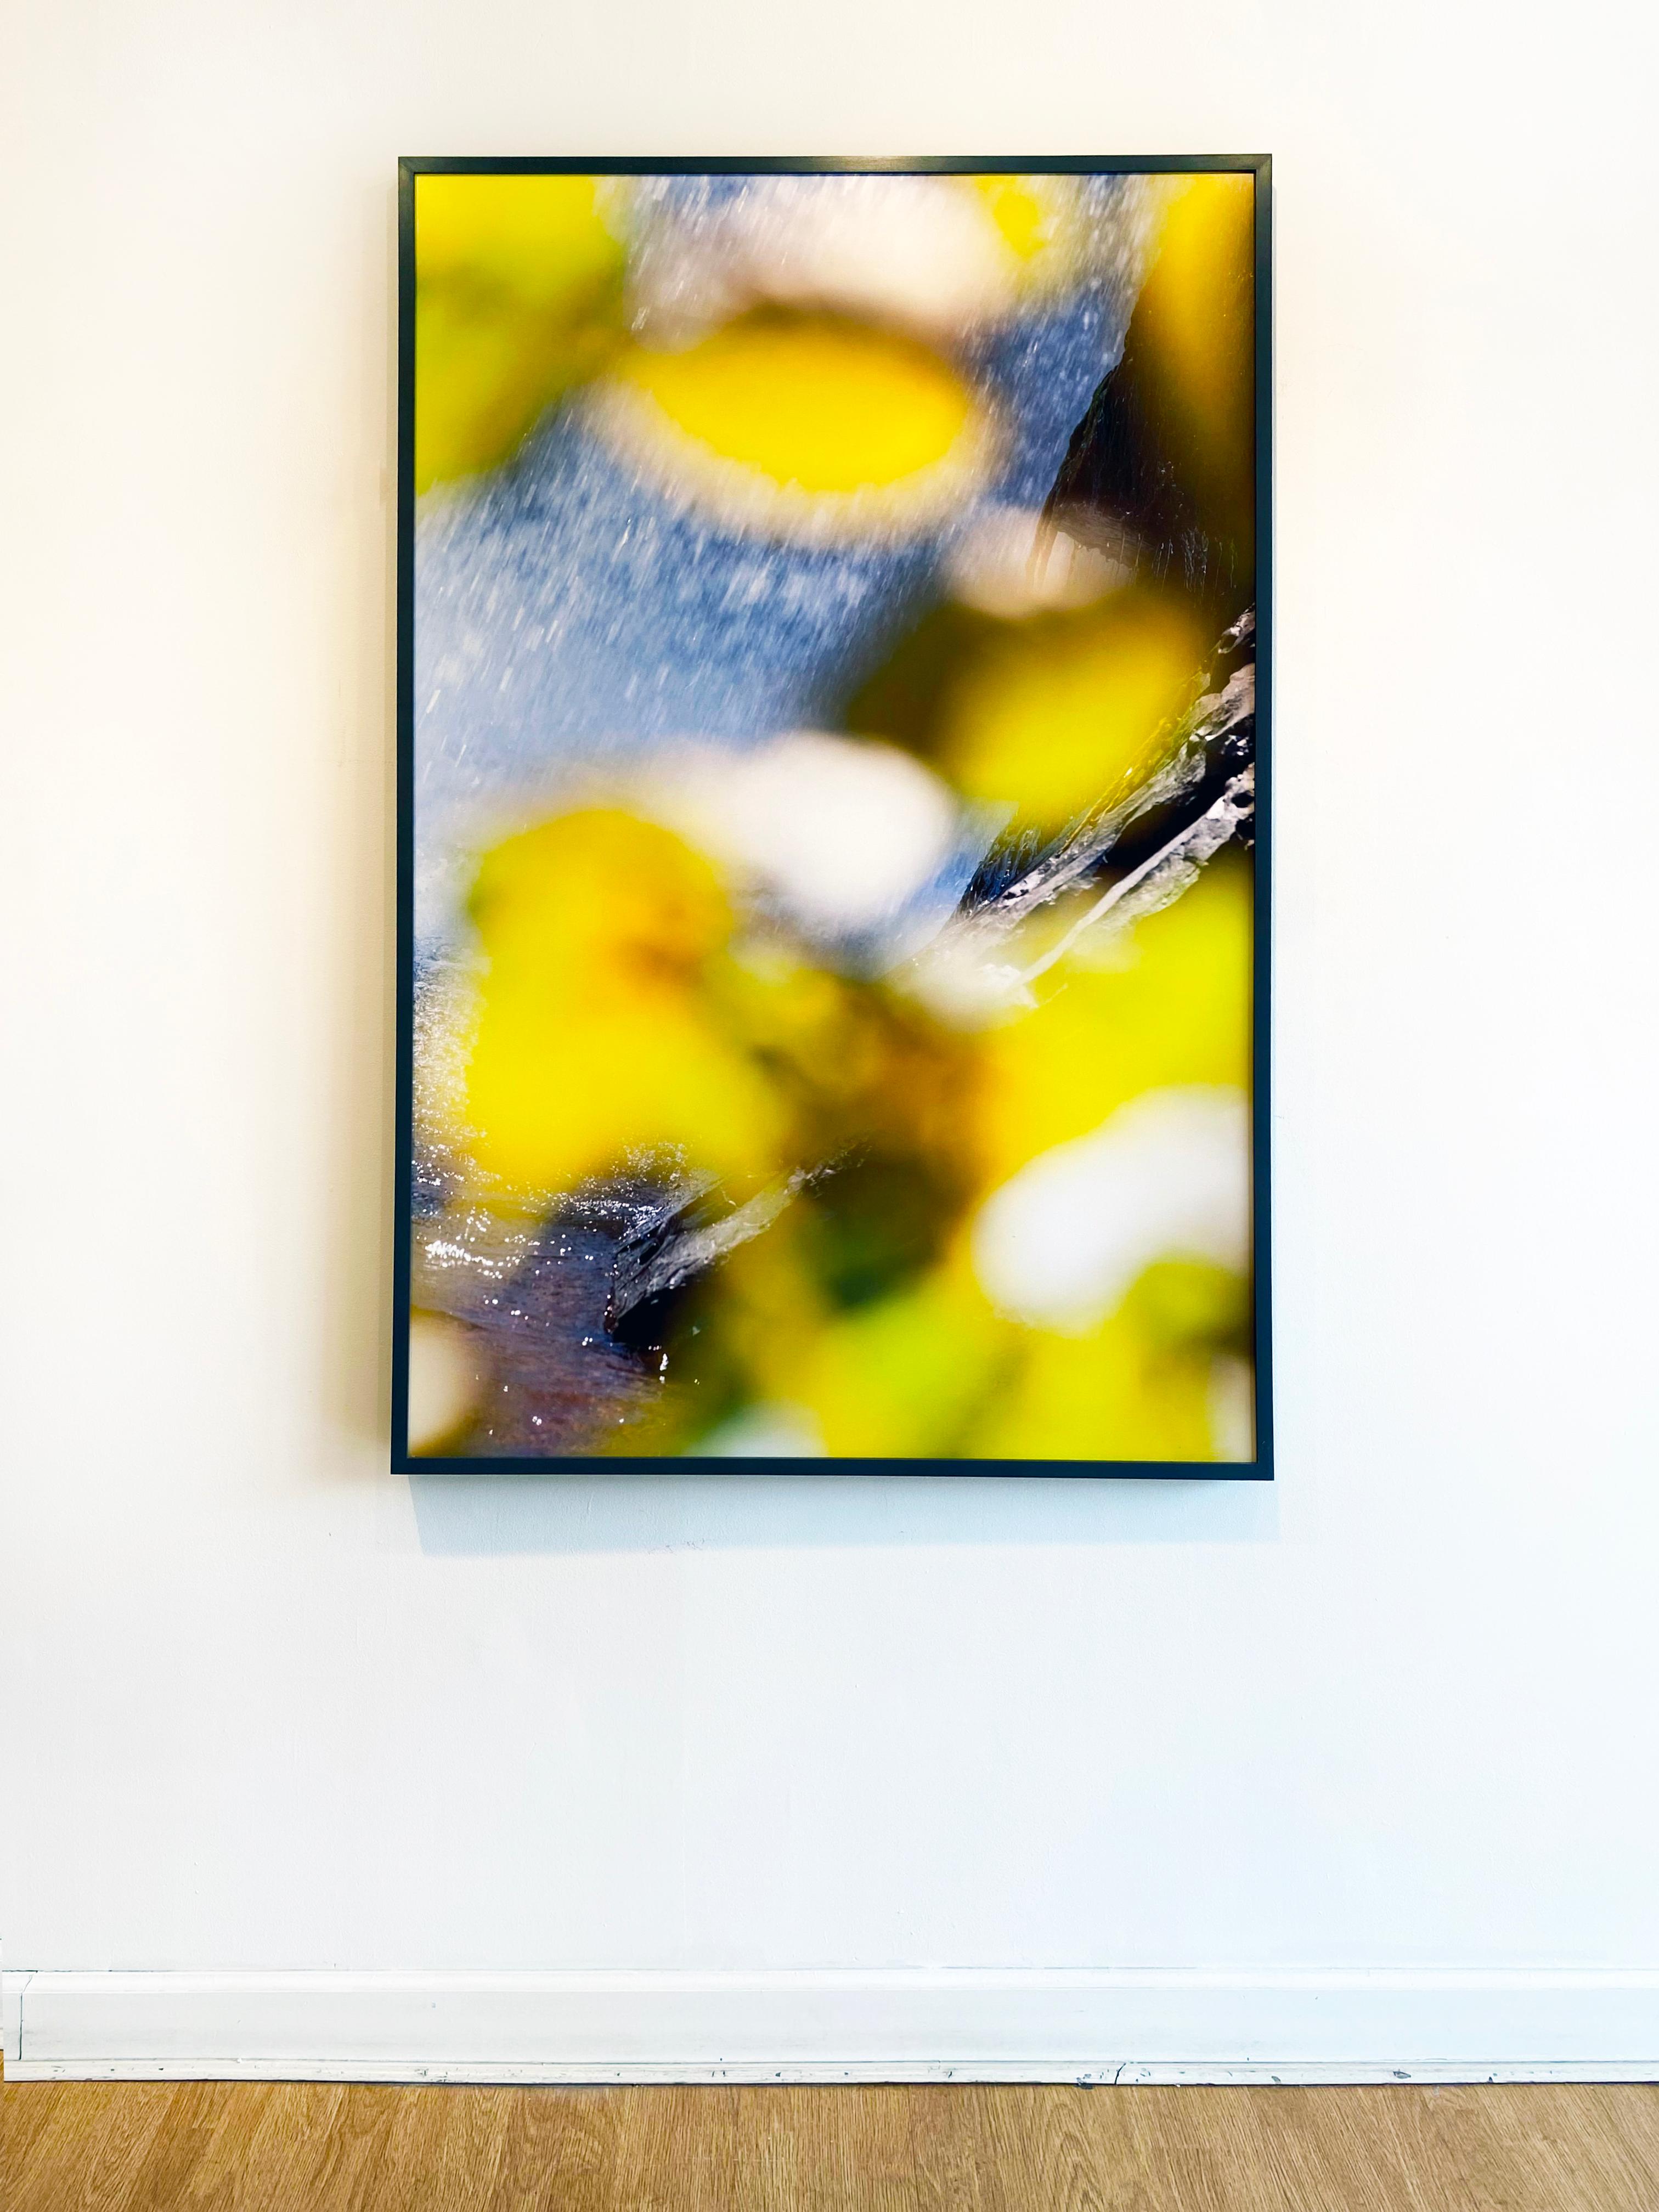 '9.2.15_2.38.42' 2017 by Susan Wides. Dye sublimation aluminum, Ed. of 5, 60 x 40 in. / Frame: 60.75 x 41 in. This color photograph features an abstracted view of water and leaves in a dark grey frame. Using state-of-the-art technology, the dye